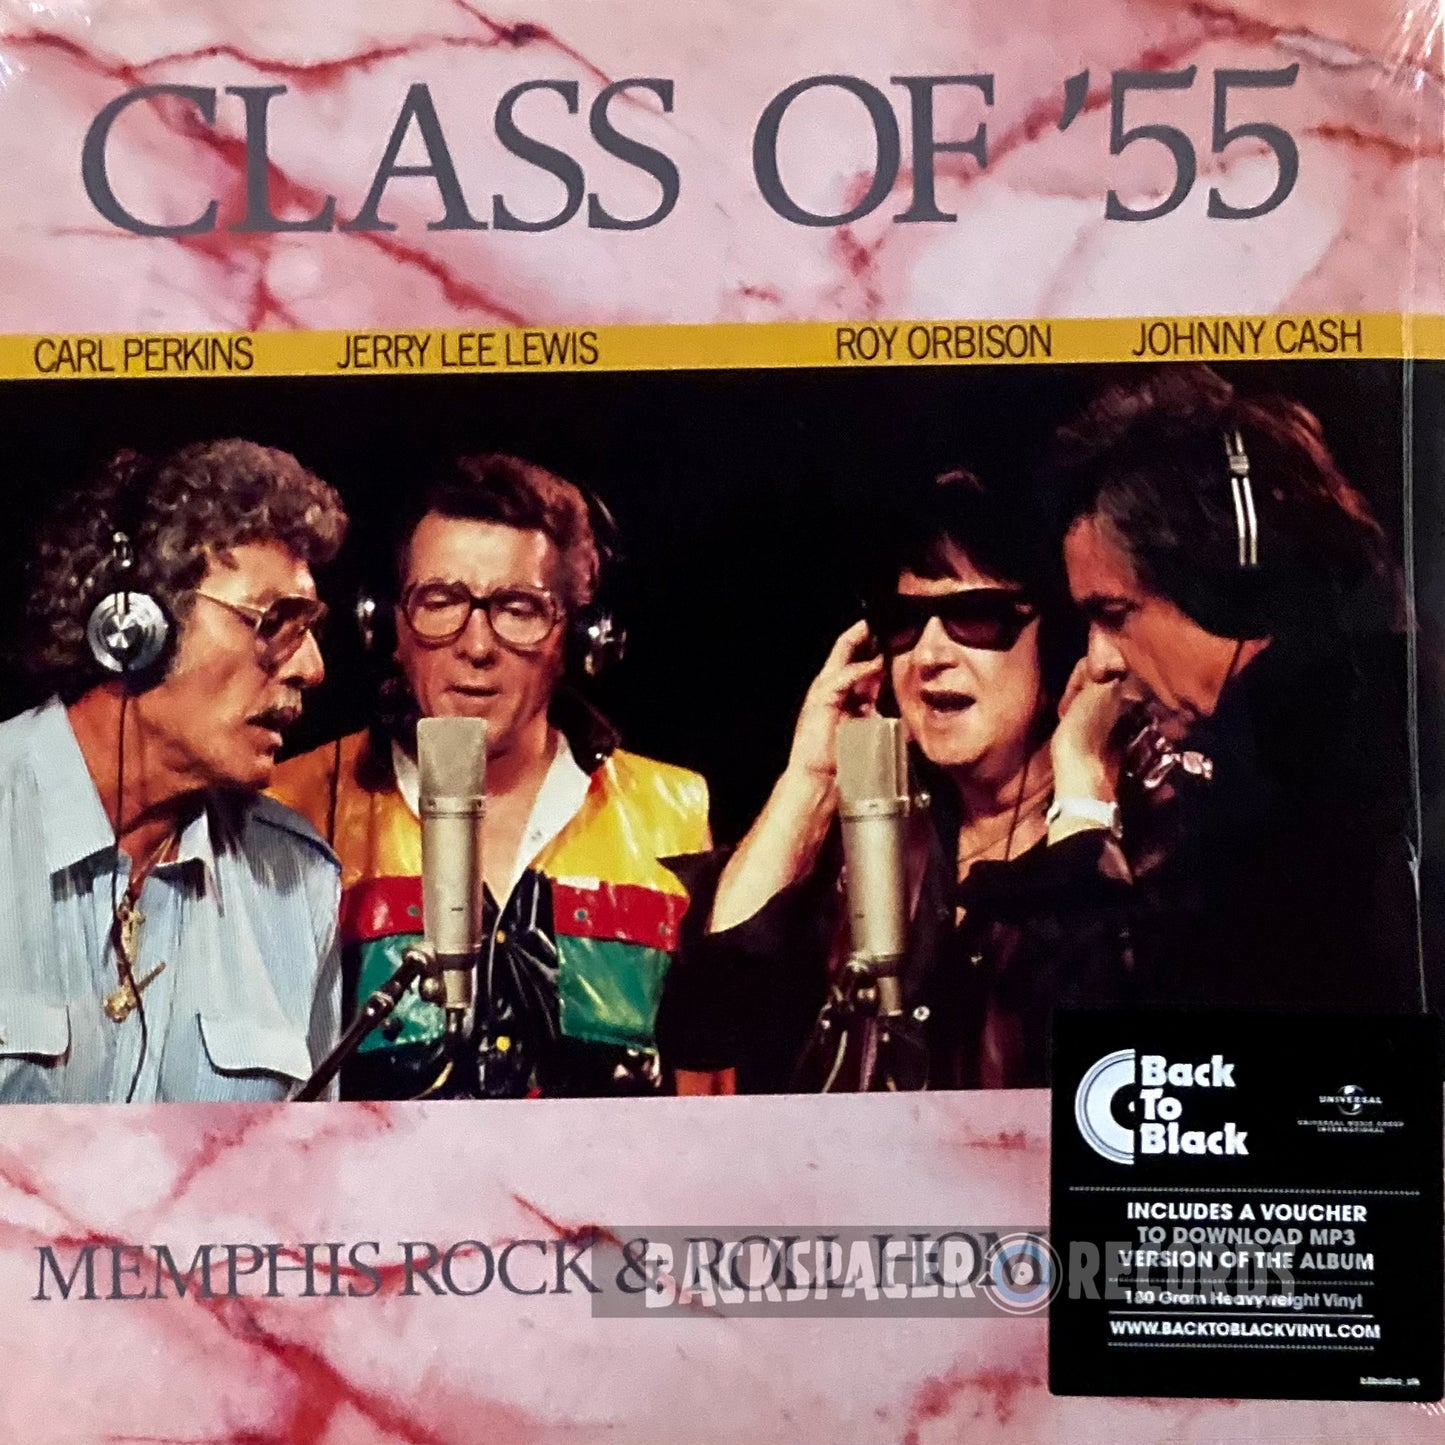 Carl Perkins, Jerry Lee Lewis, Roy Orbison, and Johnny Cash – Class of '55: Memphis Rock & Roll Homecoming (Limited Edition) LP (Sealed)